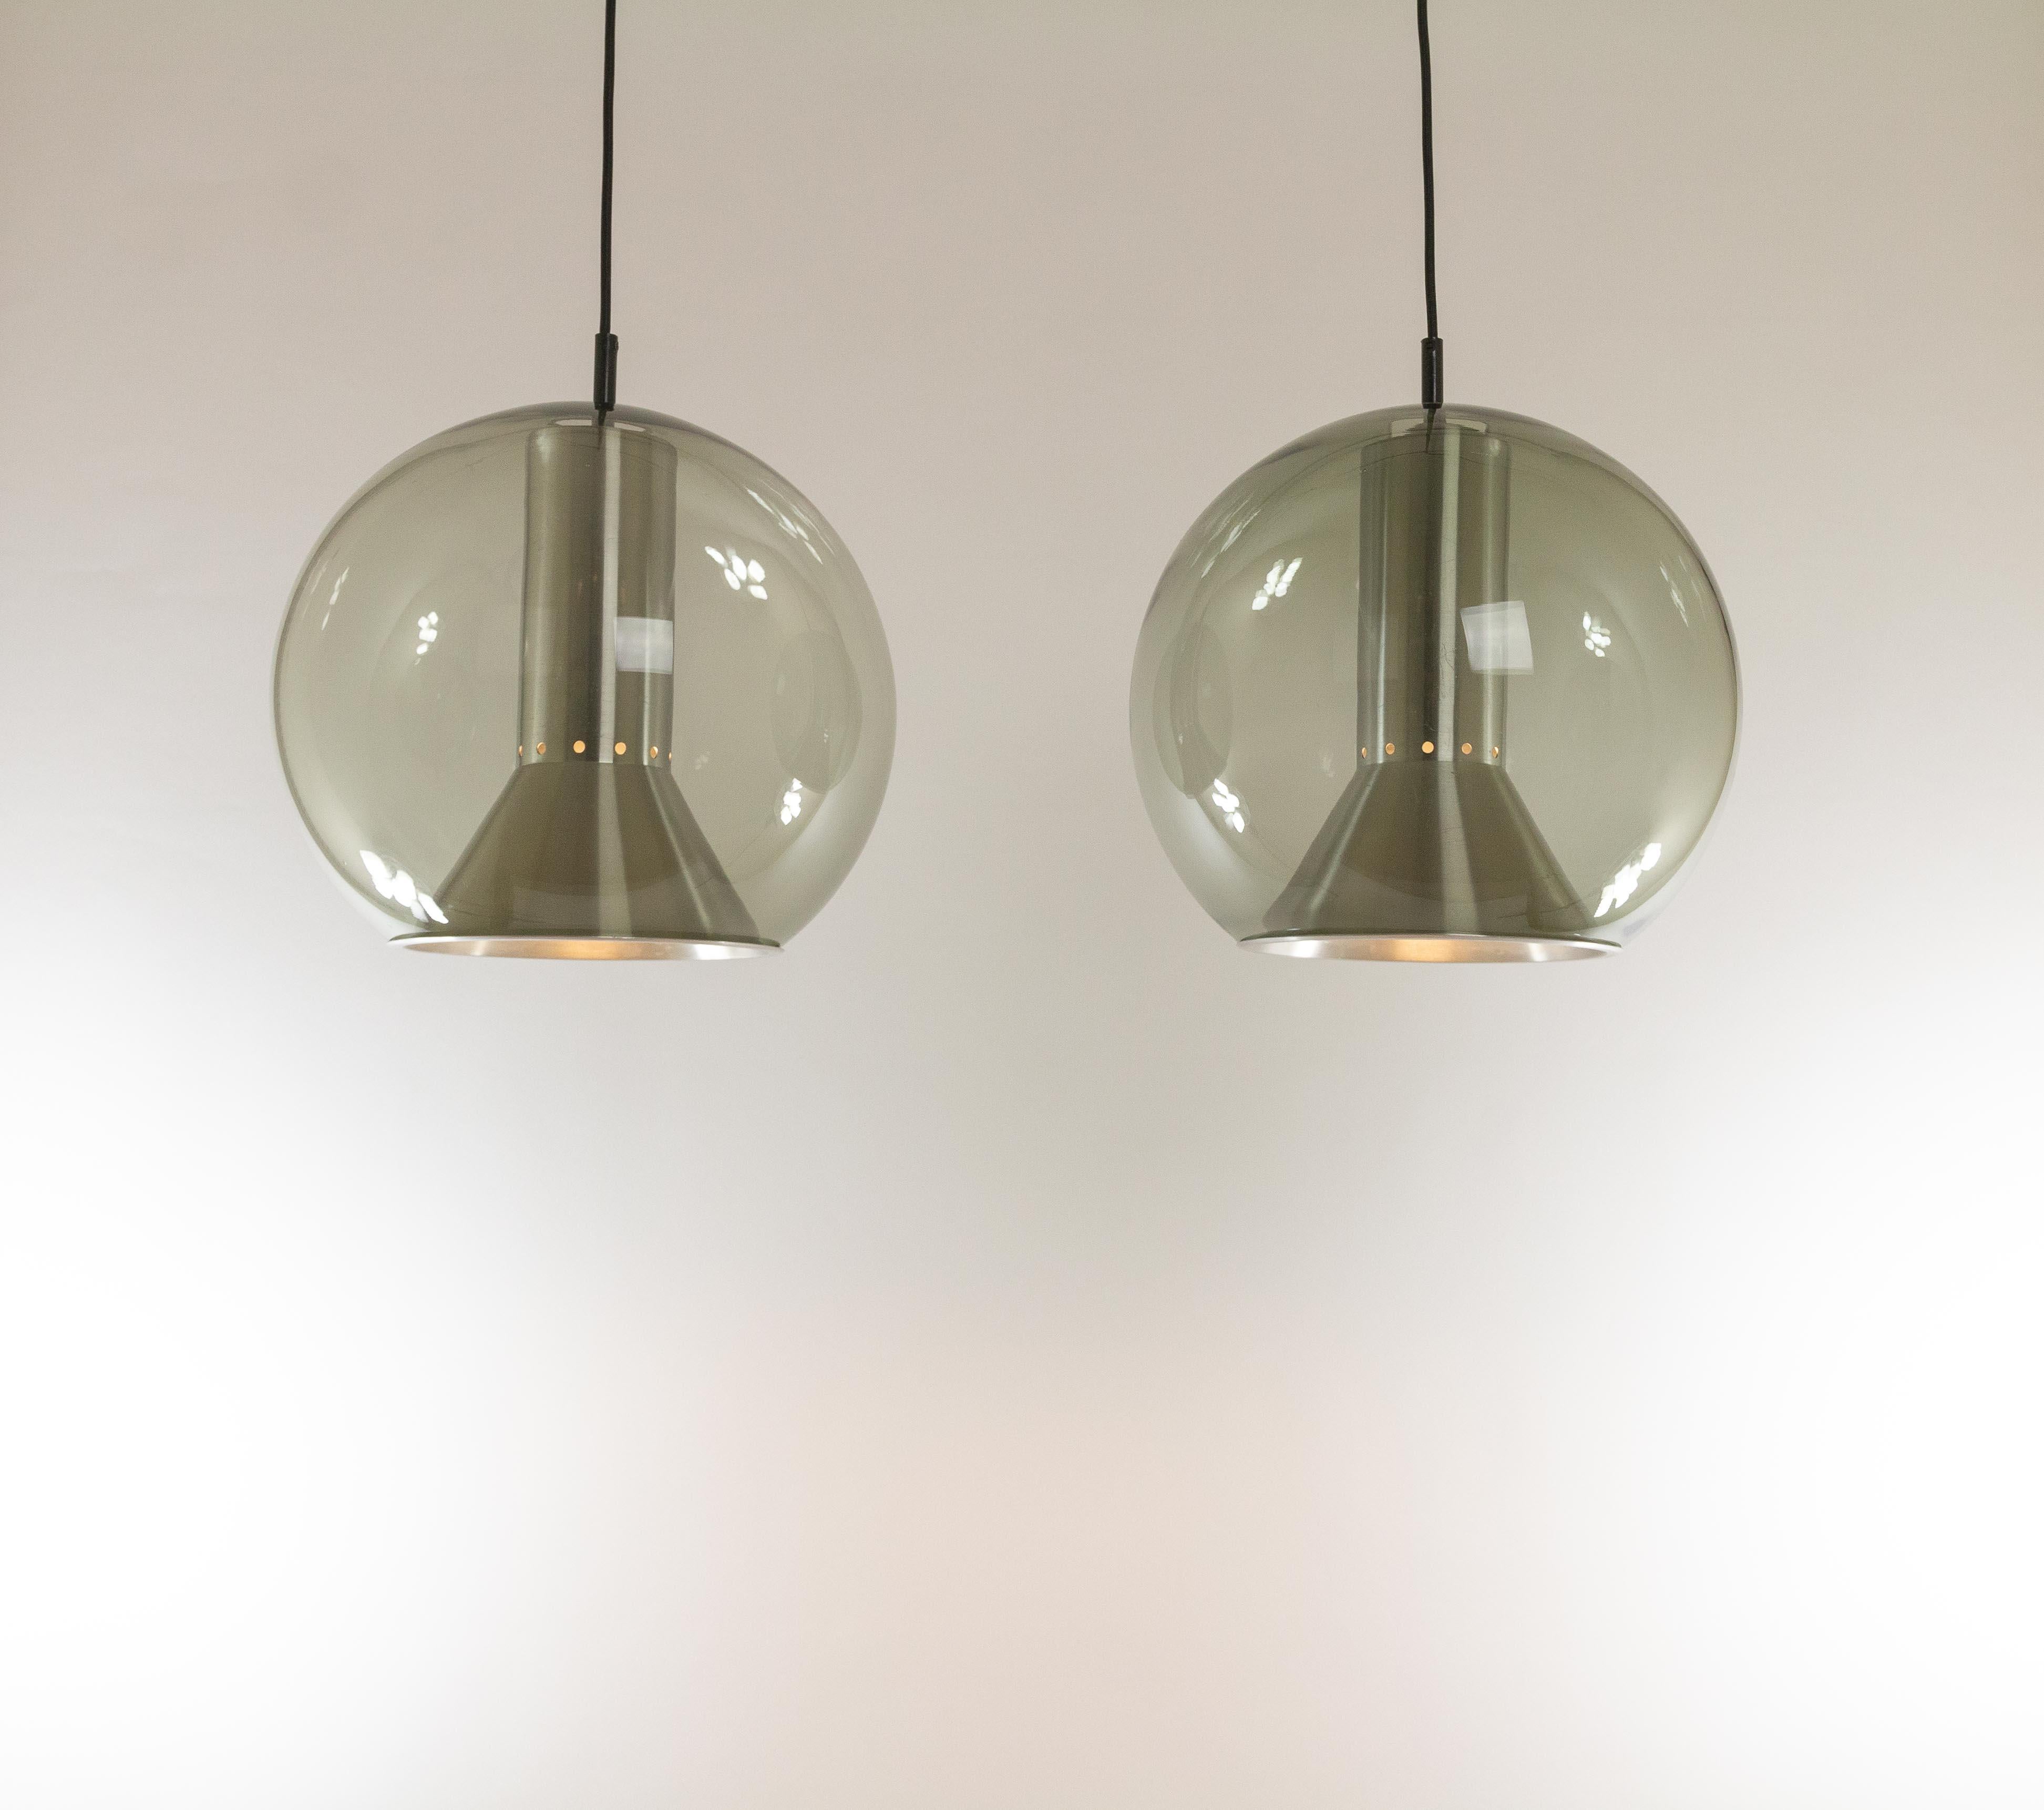 A pair of Globe pendants by Frank Ligtelijn for the Dutch lighting manufacturer RAAK Amsterdam, 1970s. 

This lamps are part of the so called Globe Series, consisting of the full range of potential models: desk, wall and floor lamps and a pendant